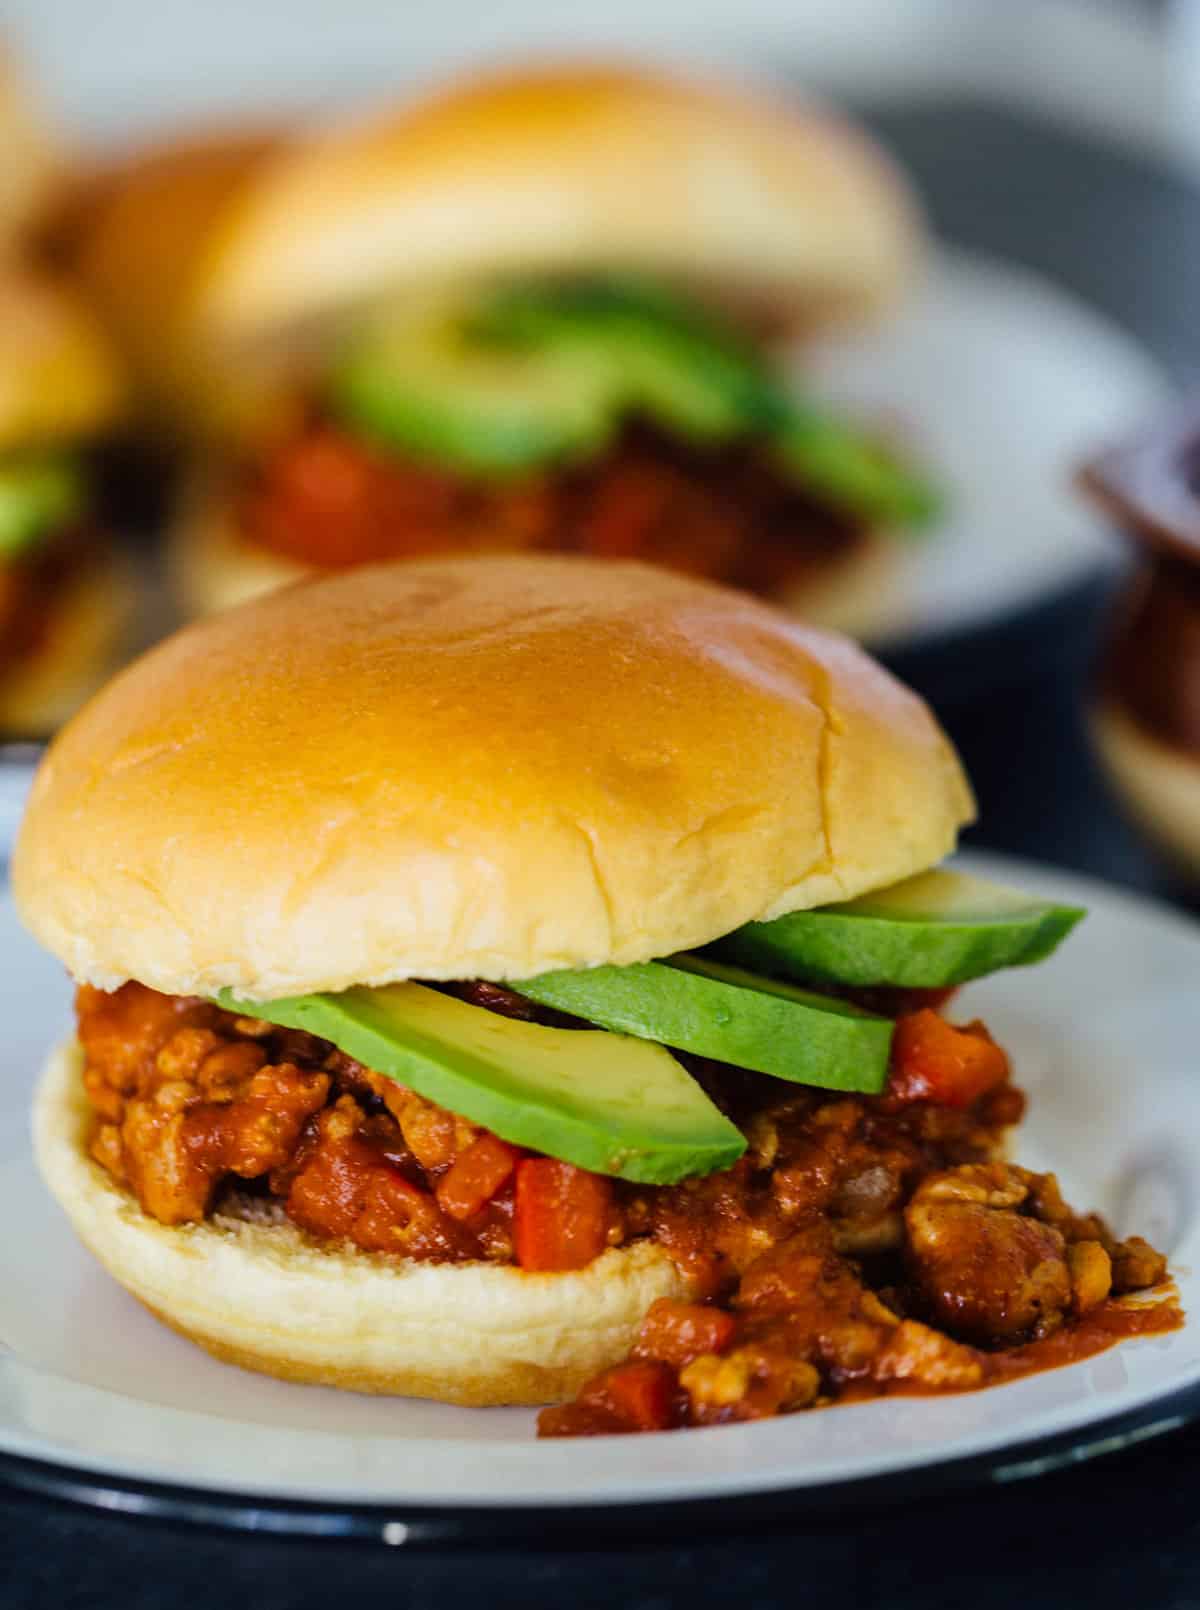 A great way to use pumpkin in a savory way! These pumpkin bbq sloppy joe's are filled with flavor and so easy to make on busy weeknights! #sloppyjoes #easyweeknightdinner #dinnerrecipe #sandwichrecipe